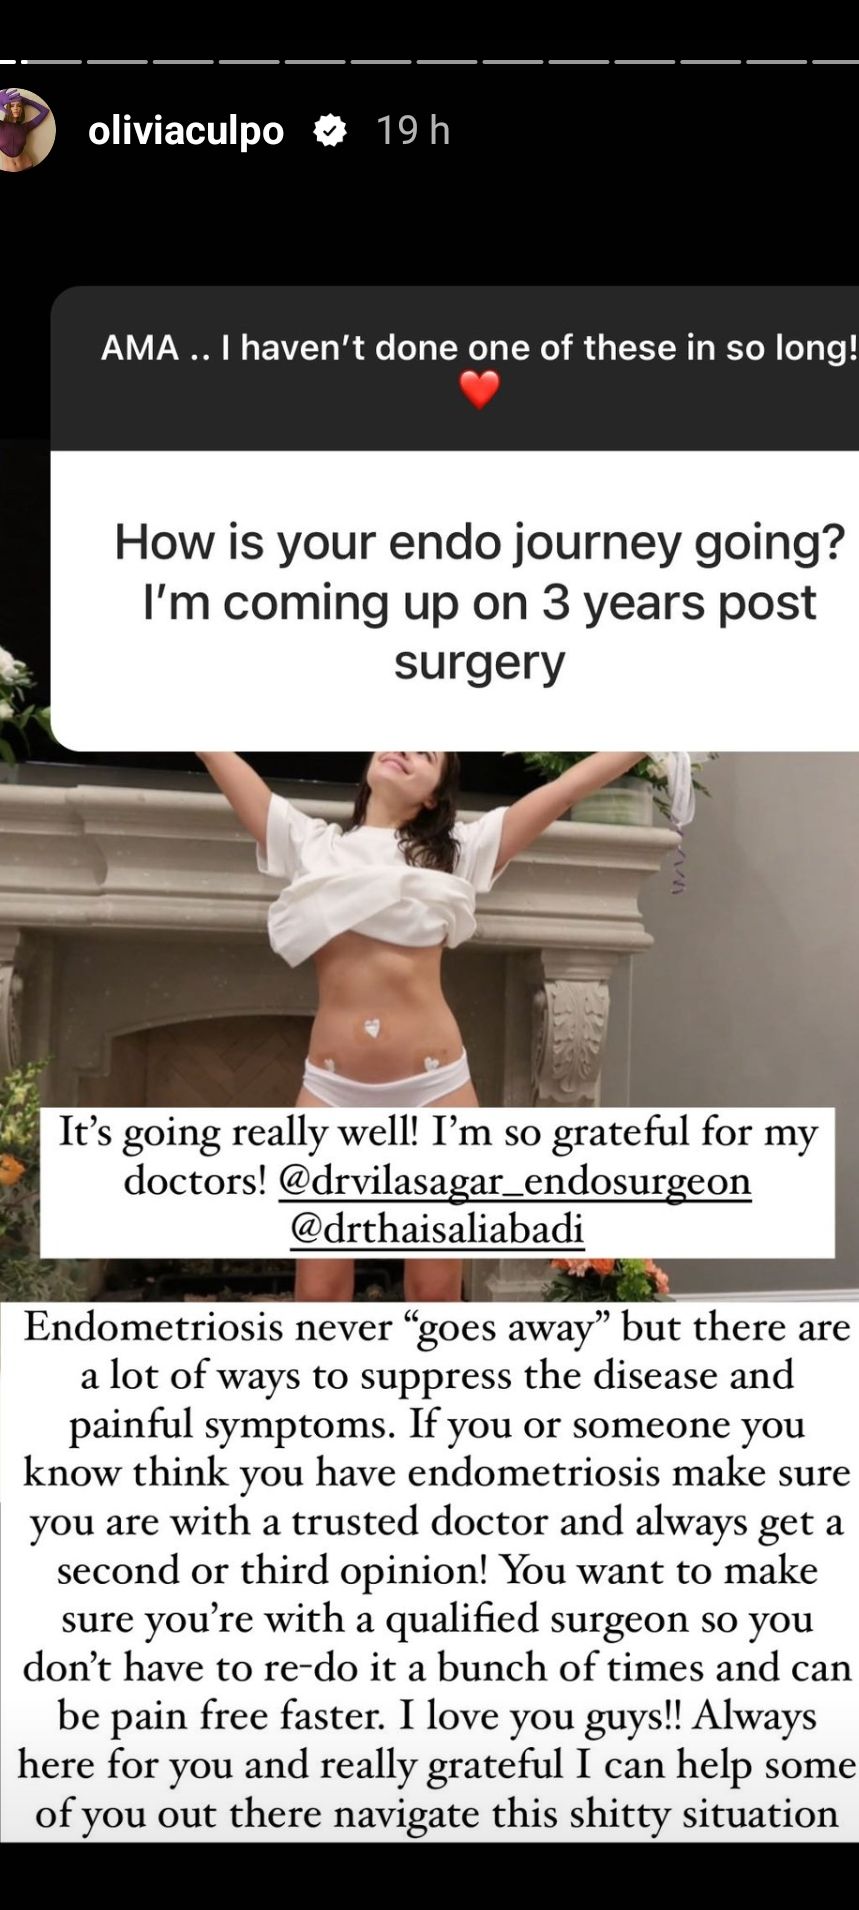 Olivia shares an update about her endometriosis